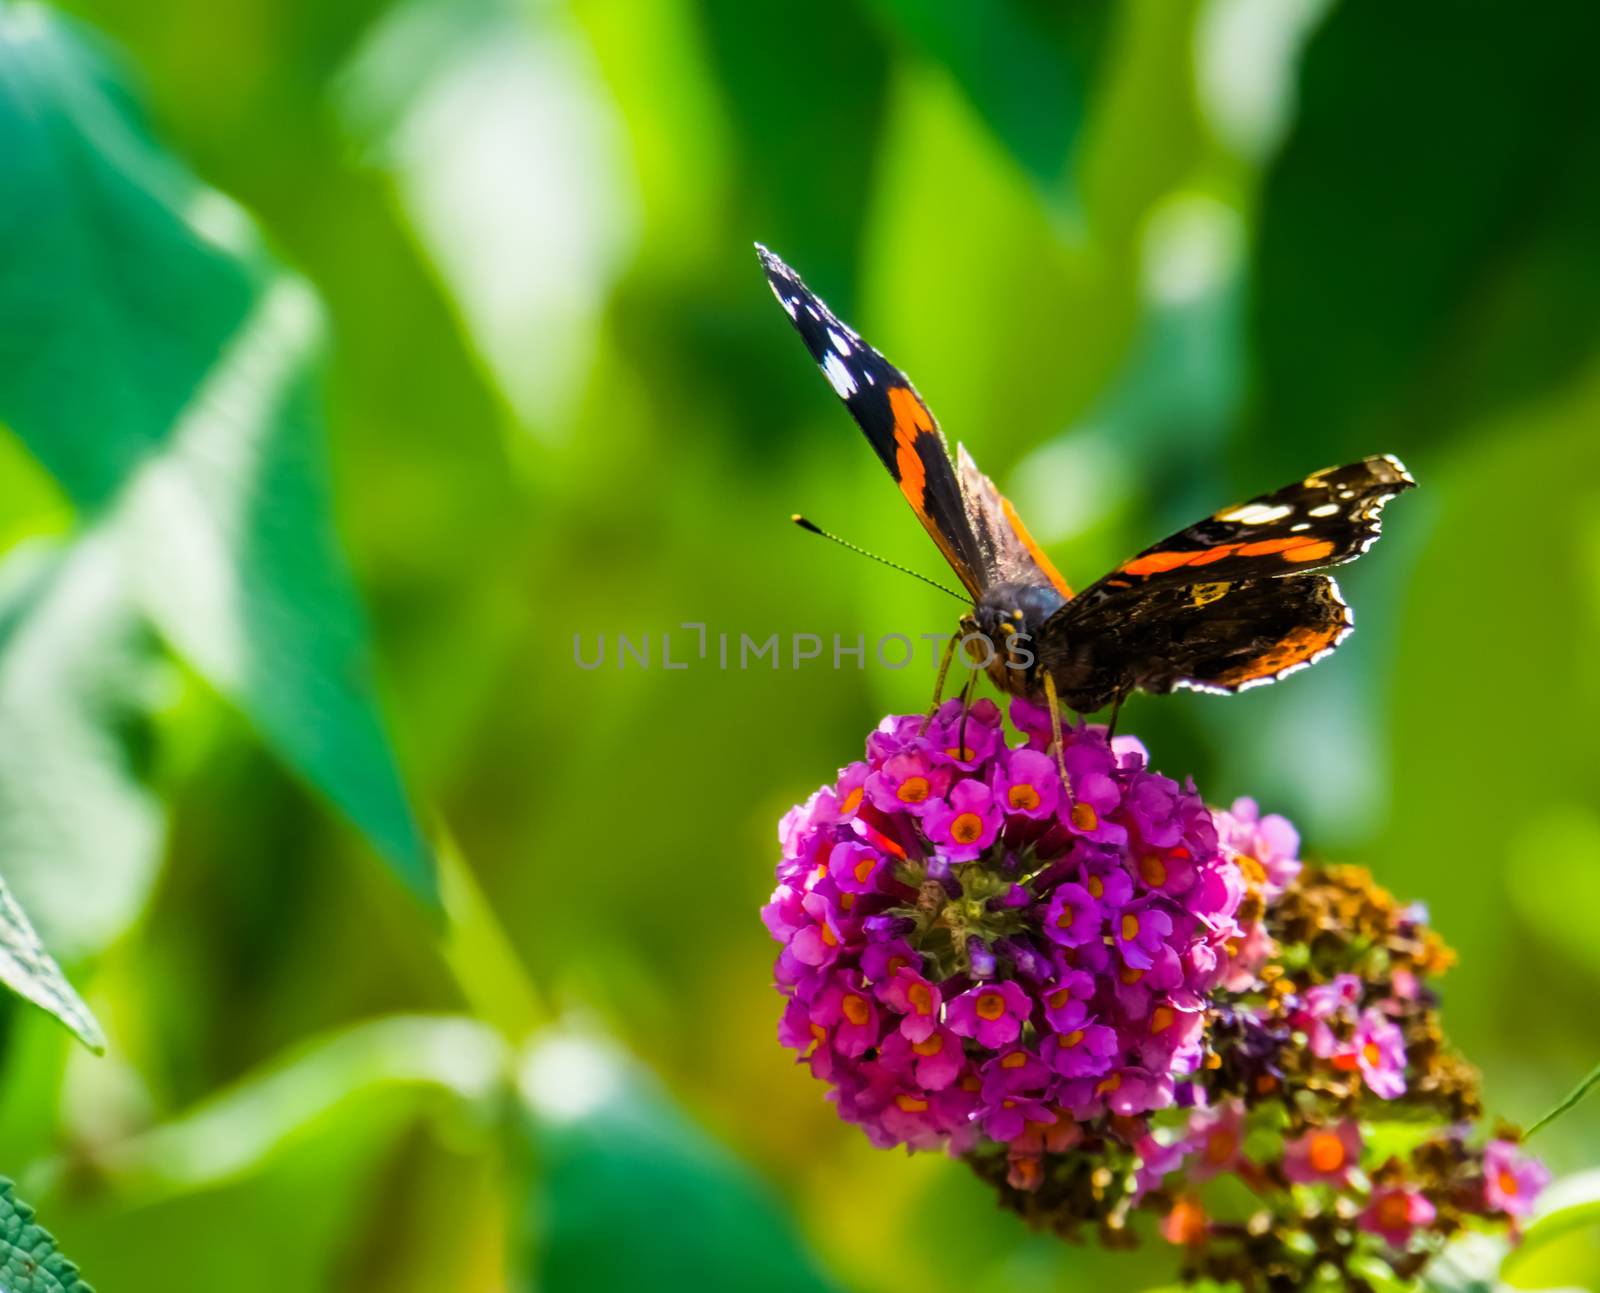 beautiful front closeup of a red admiral butterfly, common insect specie from Europe by charlottebleijenberg